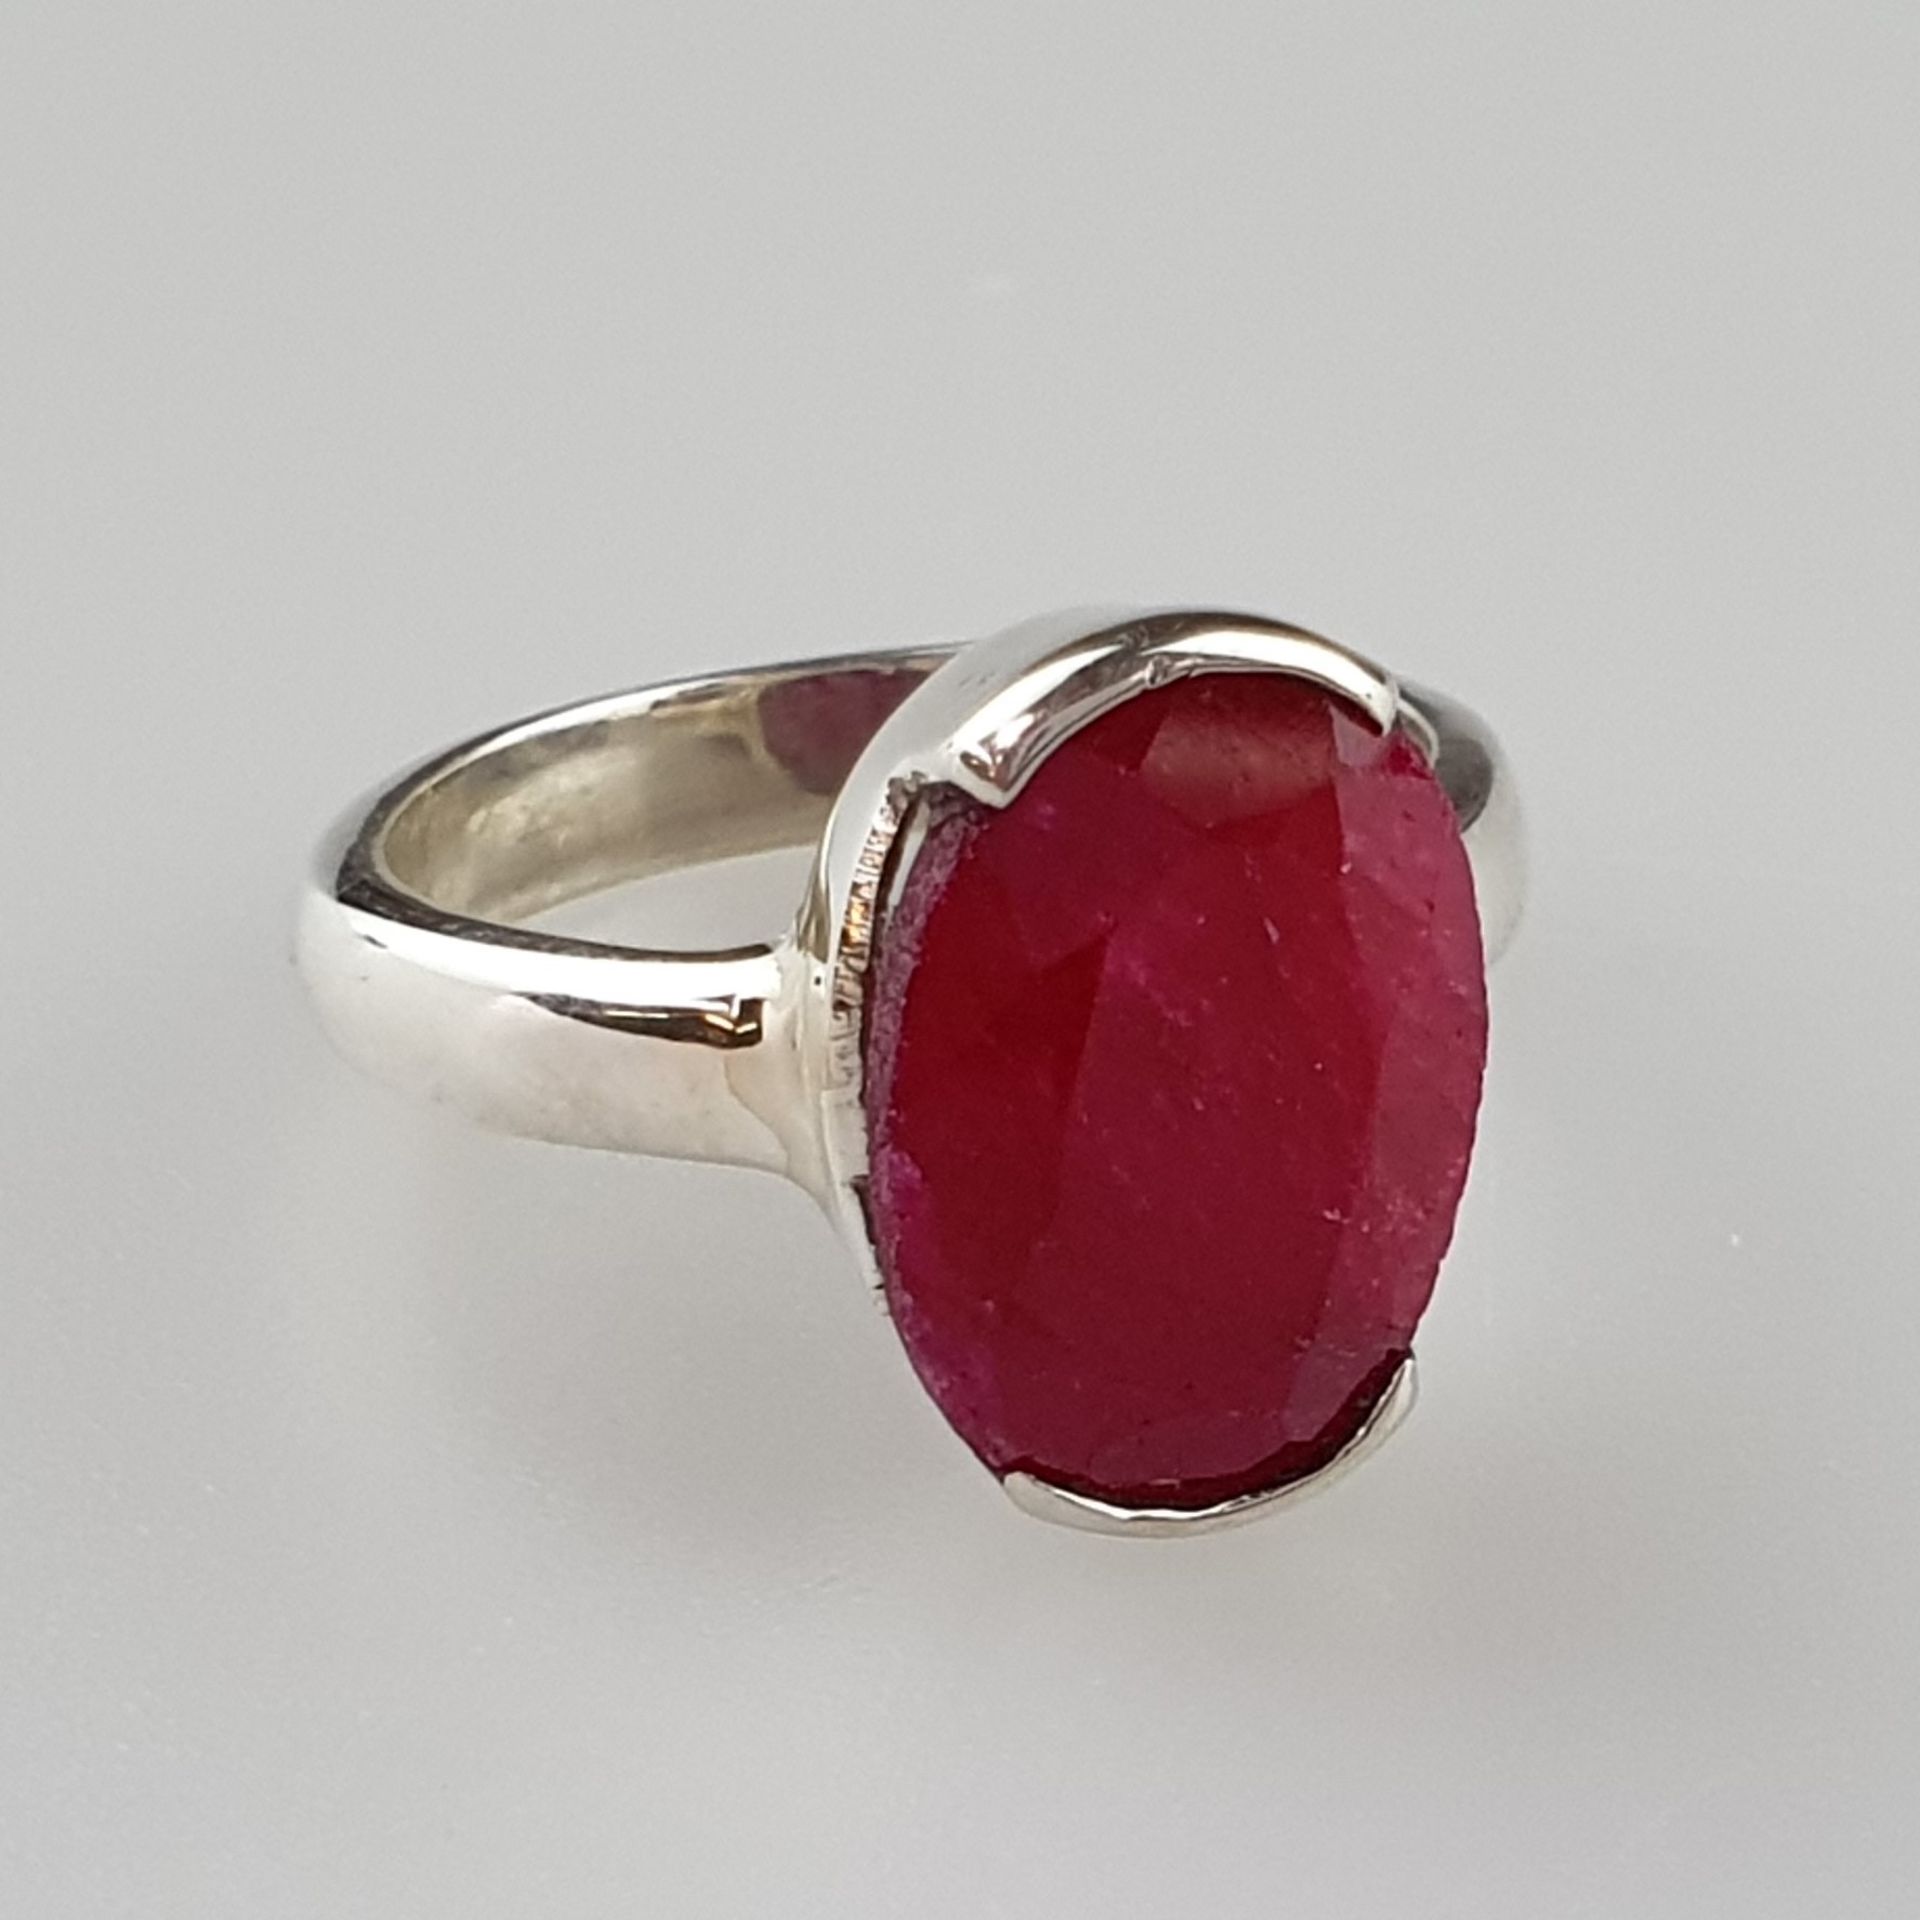 Oval Ruby Set In 92.5 Sterling Silver Ring, ca. 4,8g, ring size: ca. 16,5, stone measurements ca. 1